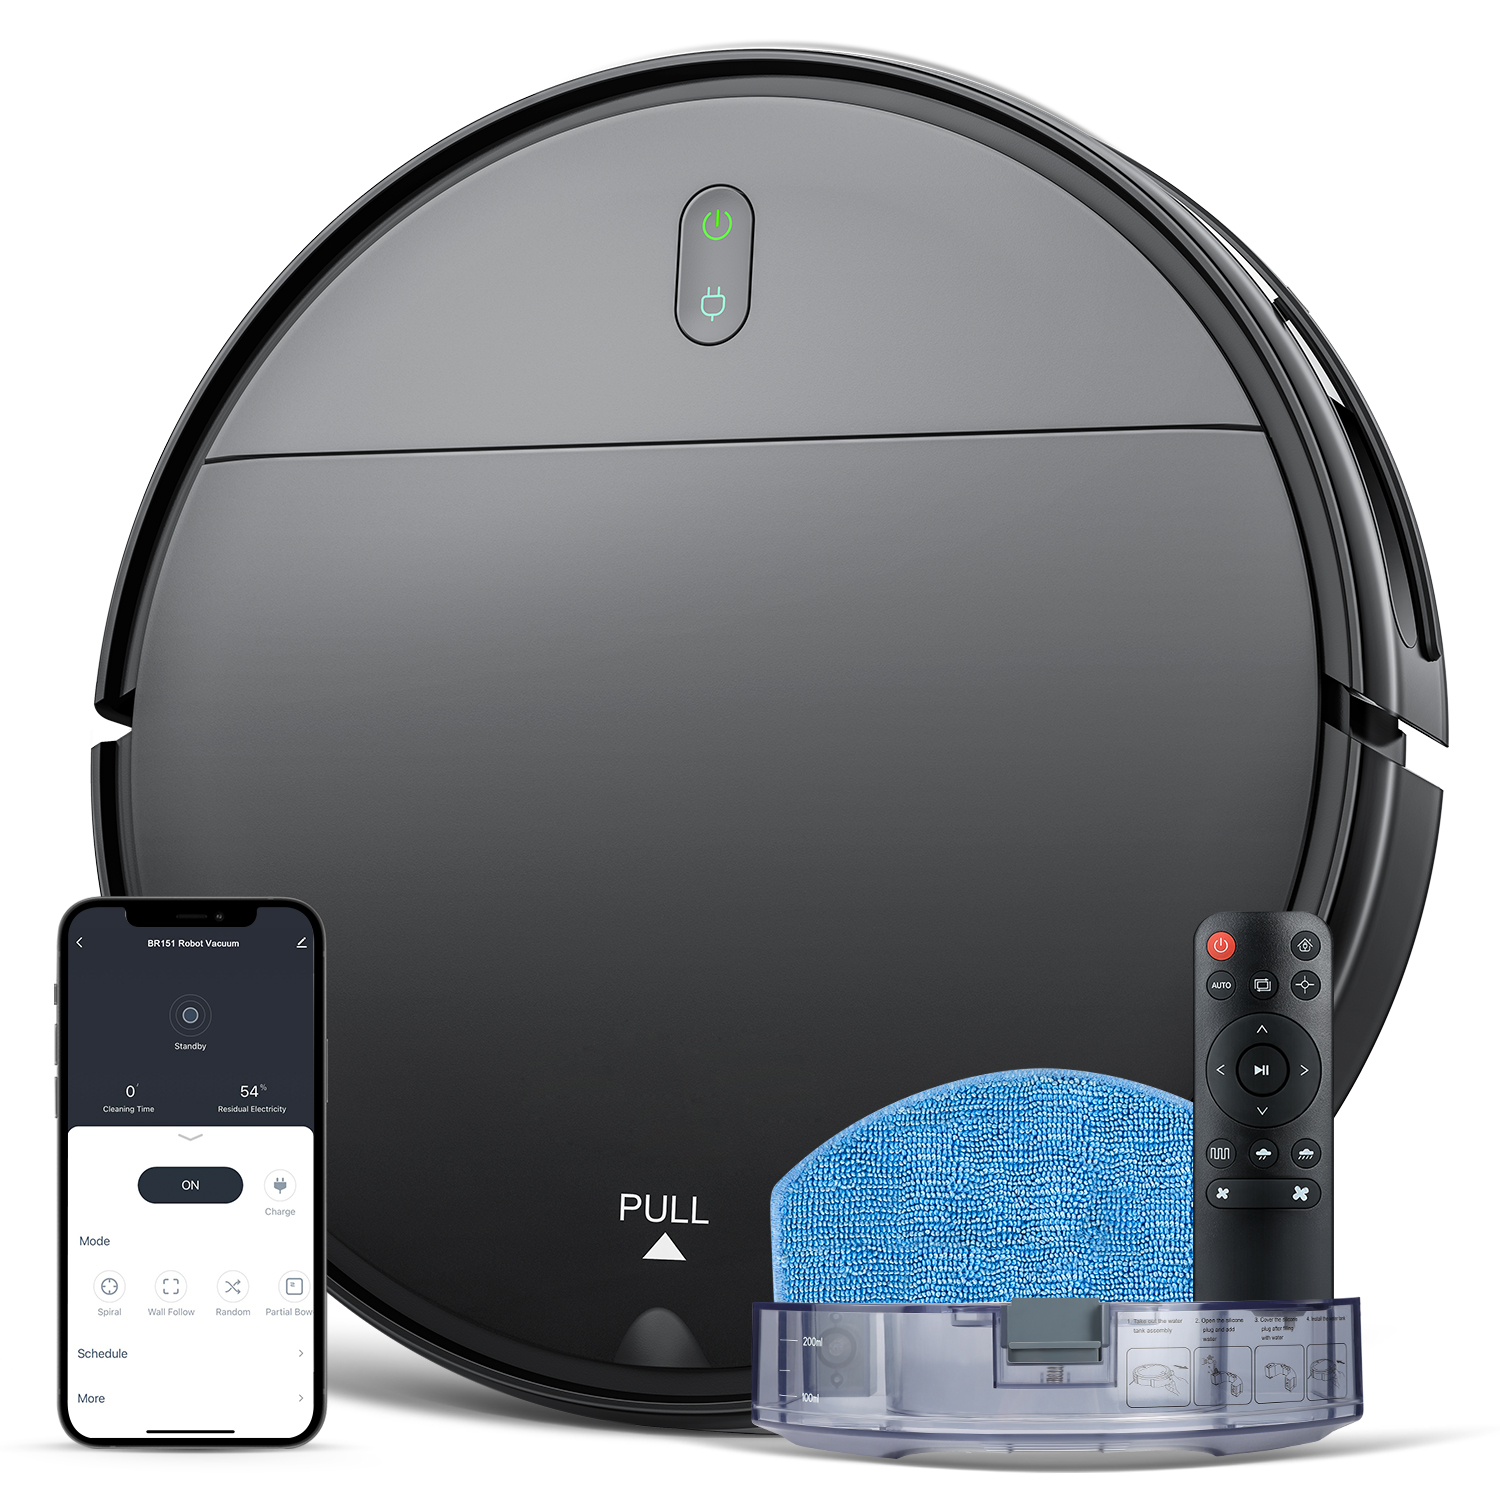 ONSON Robot Vacuum Cleaner, 2 in 1 Robot Vacuum and Mop Combo, With WIFI Connection For Pet Hair, Hard Floor